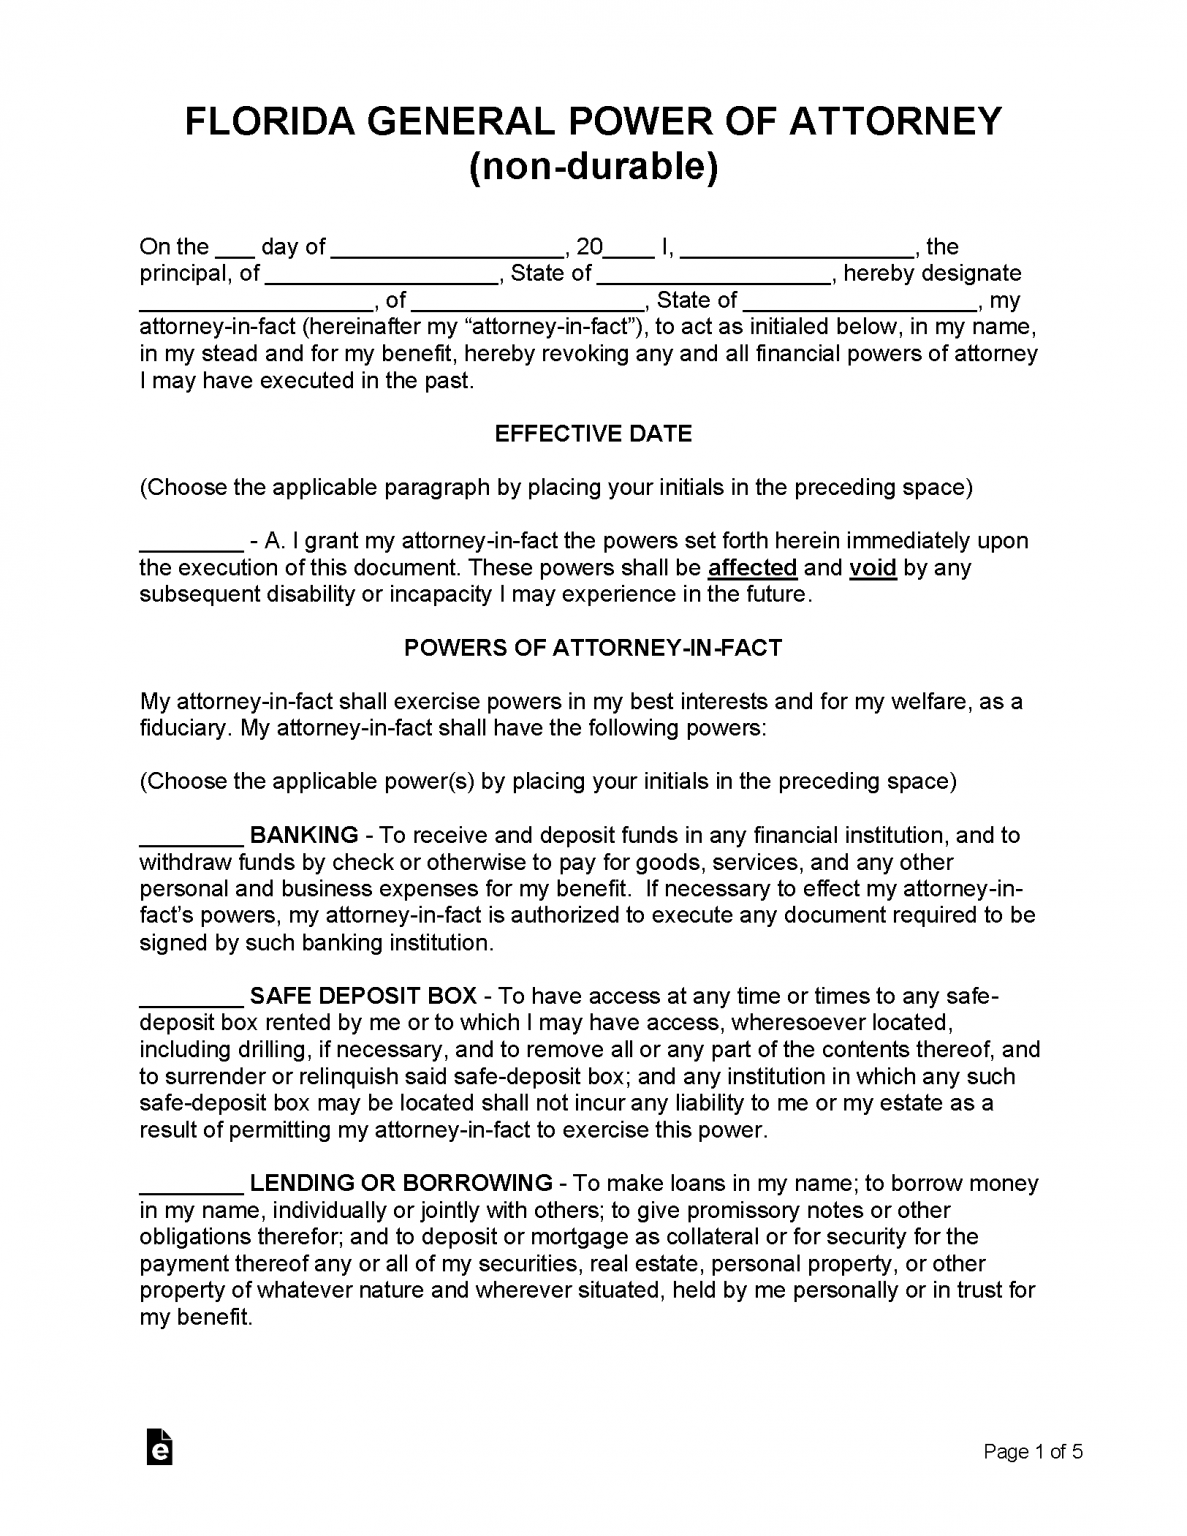 florida-power-of-attorney-form-free-printable